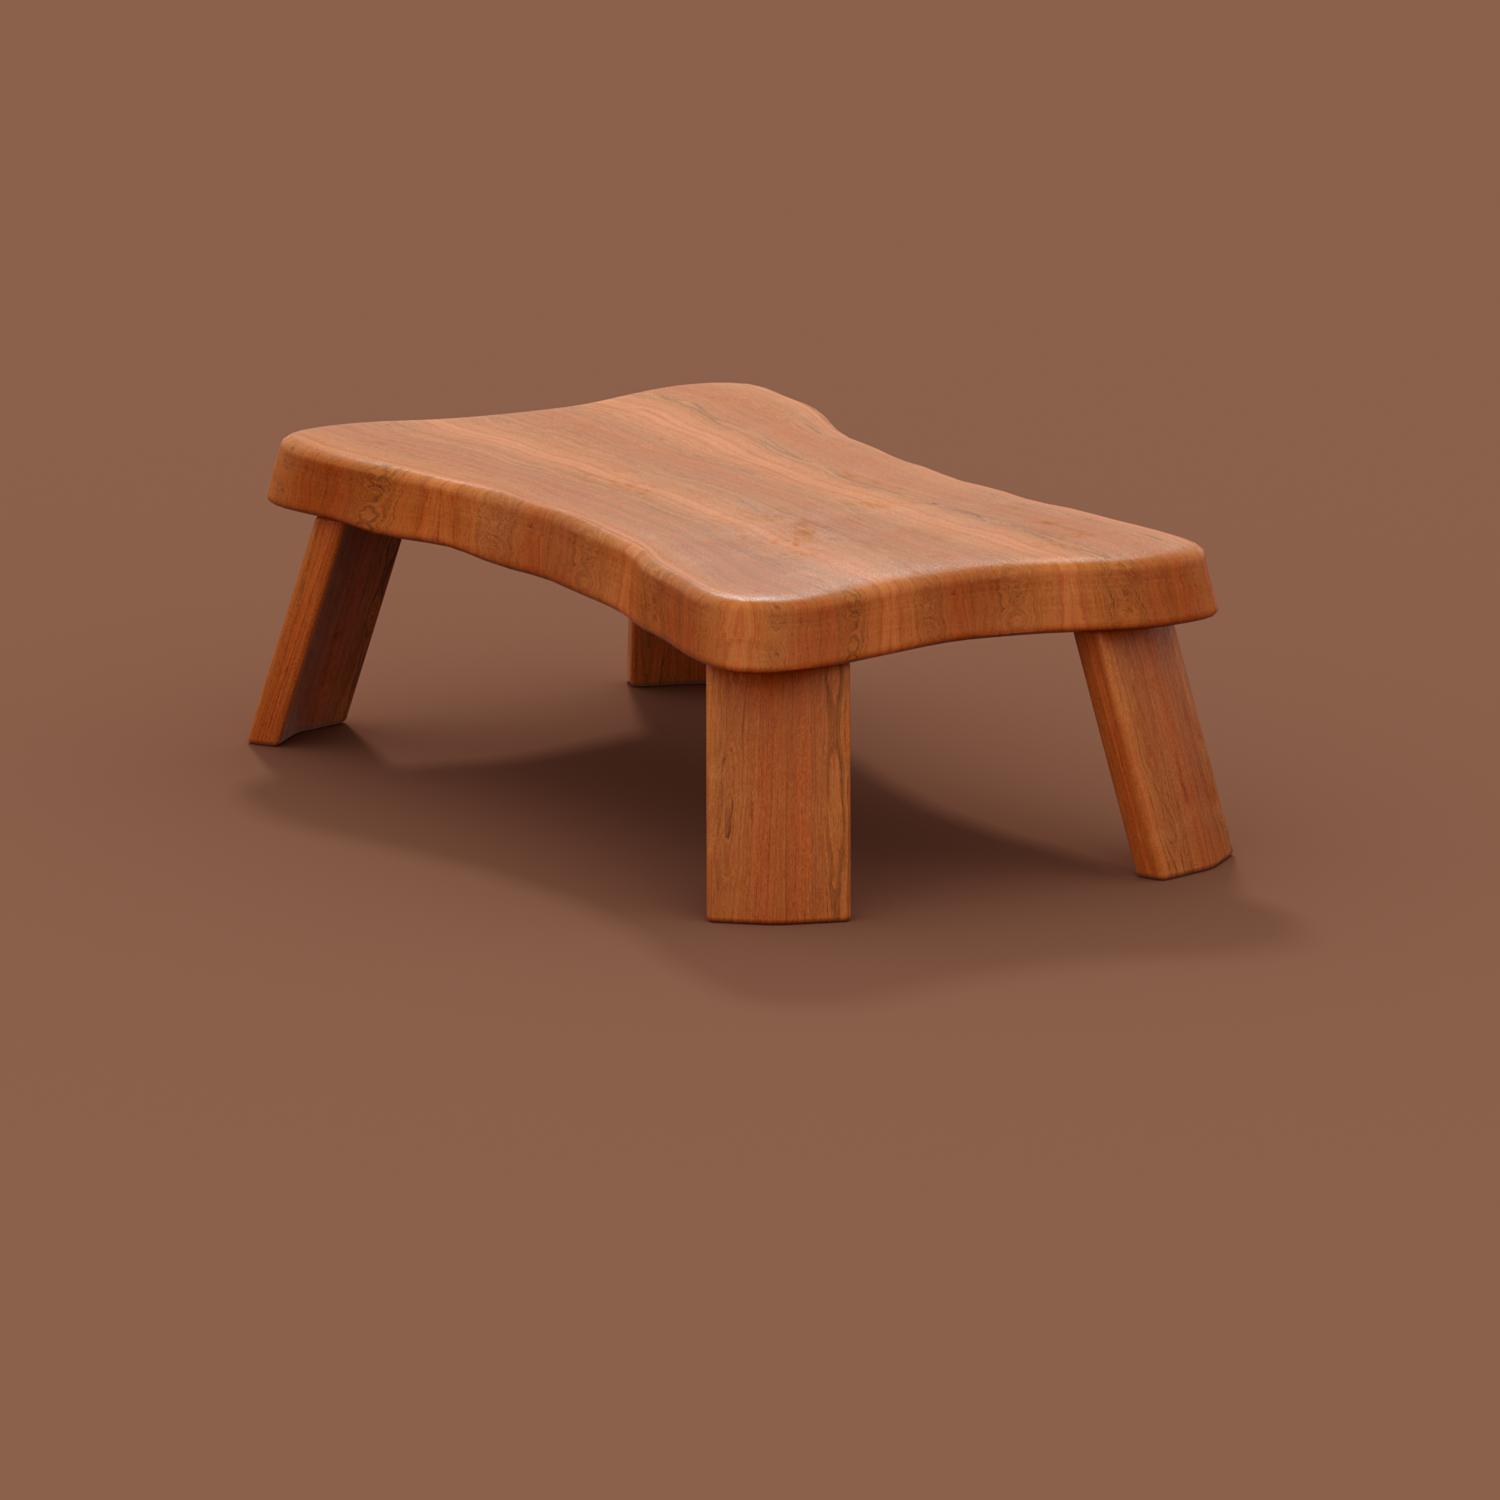 NATURAL-WOODEN-TABLE